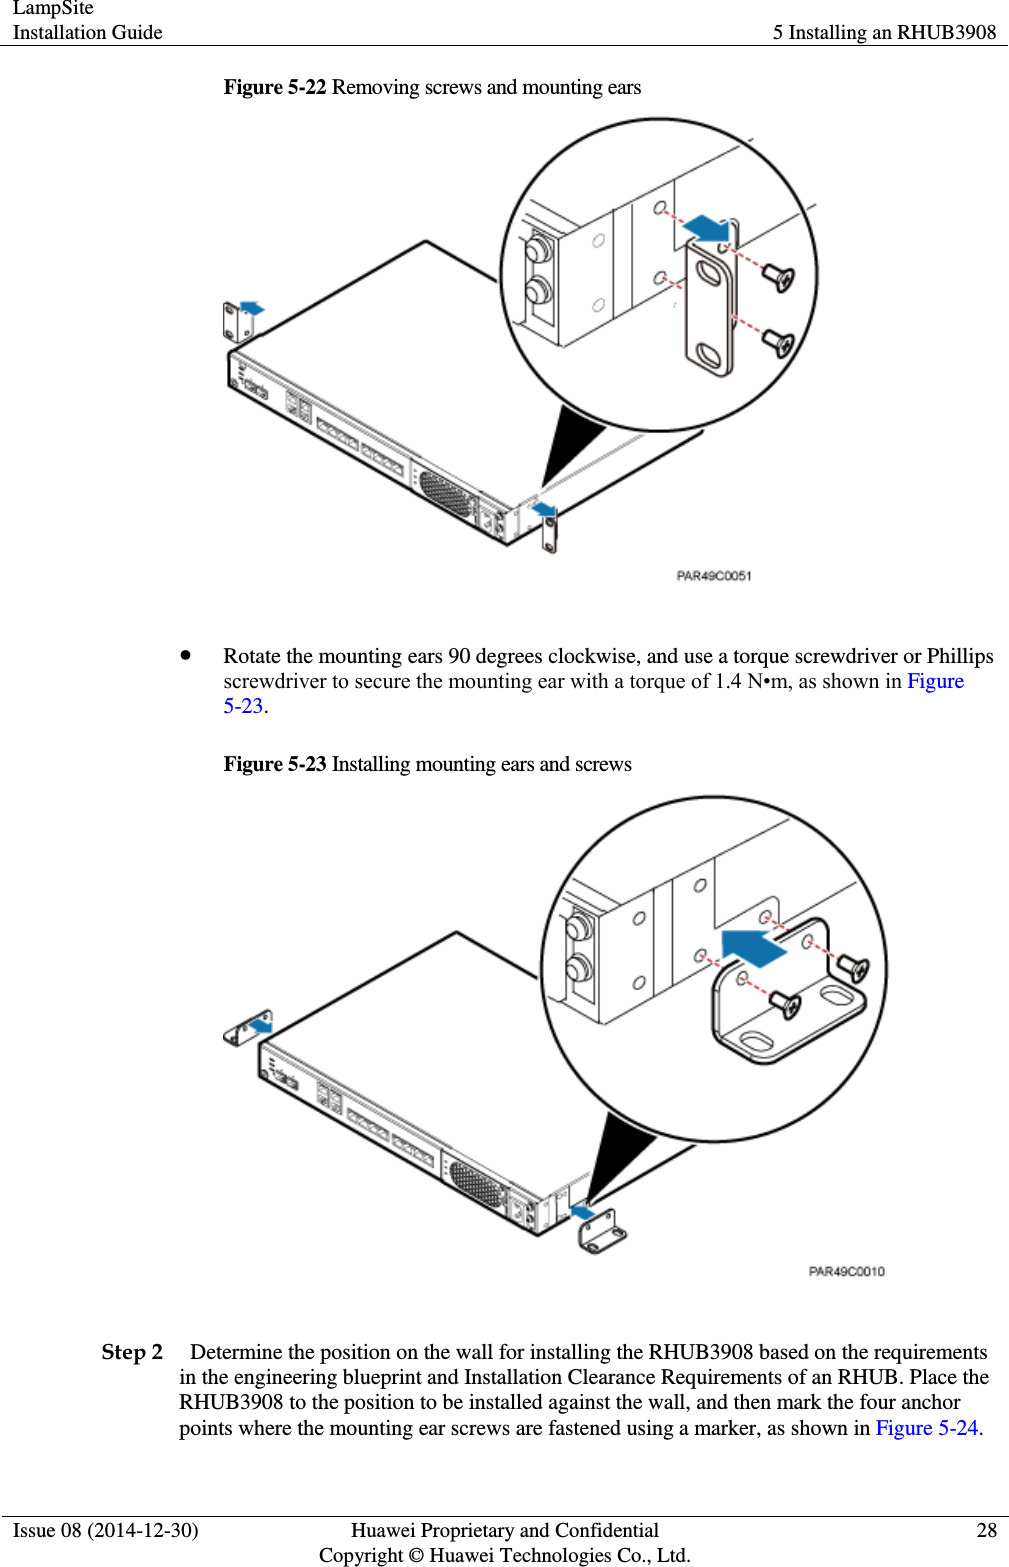 LampSite Installation Guide 5 Installing an RHUB3908  Issue 08 (2014-12-30) Huawei Proprietary and Confidential                                     Copyright © Huawei Technologies Co., Ltd. 28  Figure 5-22 Removing screws and mounting ears    Rotate the mounting ears 90 degrees clockwise, and use a torque screwdriver or Phillips screwdriver to secure the mounting ear with a torque of 1.4 N•m, as shown in Figure 5-23.   Figure 5-23 Installing mounting ears and screws   Step 2   Determine the position on the wall for installing the RHUB3908 based on the requirements in the engineering blueprint and Installation Clearance Requirements of an RHUB. Place the RHUB3908 to the position to be installed against the wall, and then mark the four anchor points where the mounting ear screws are fastened using a marker, as shown in Figure 5-24.   